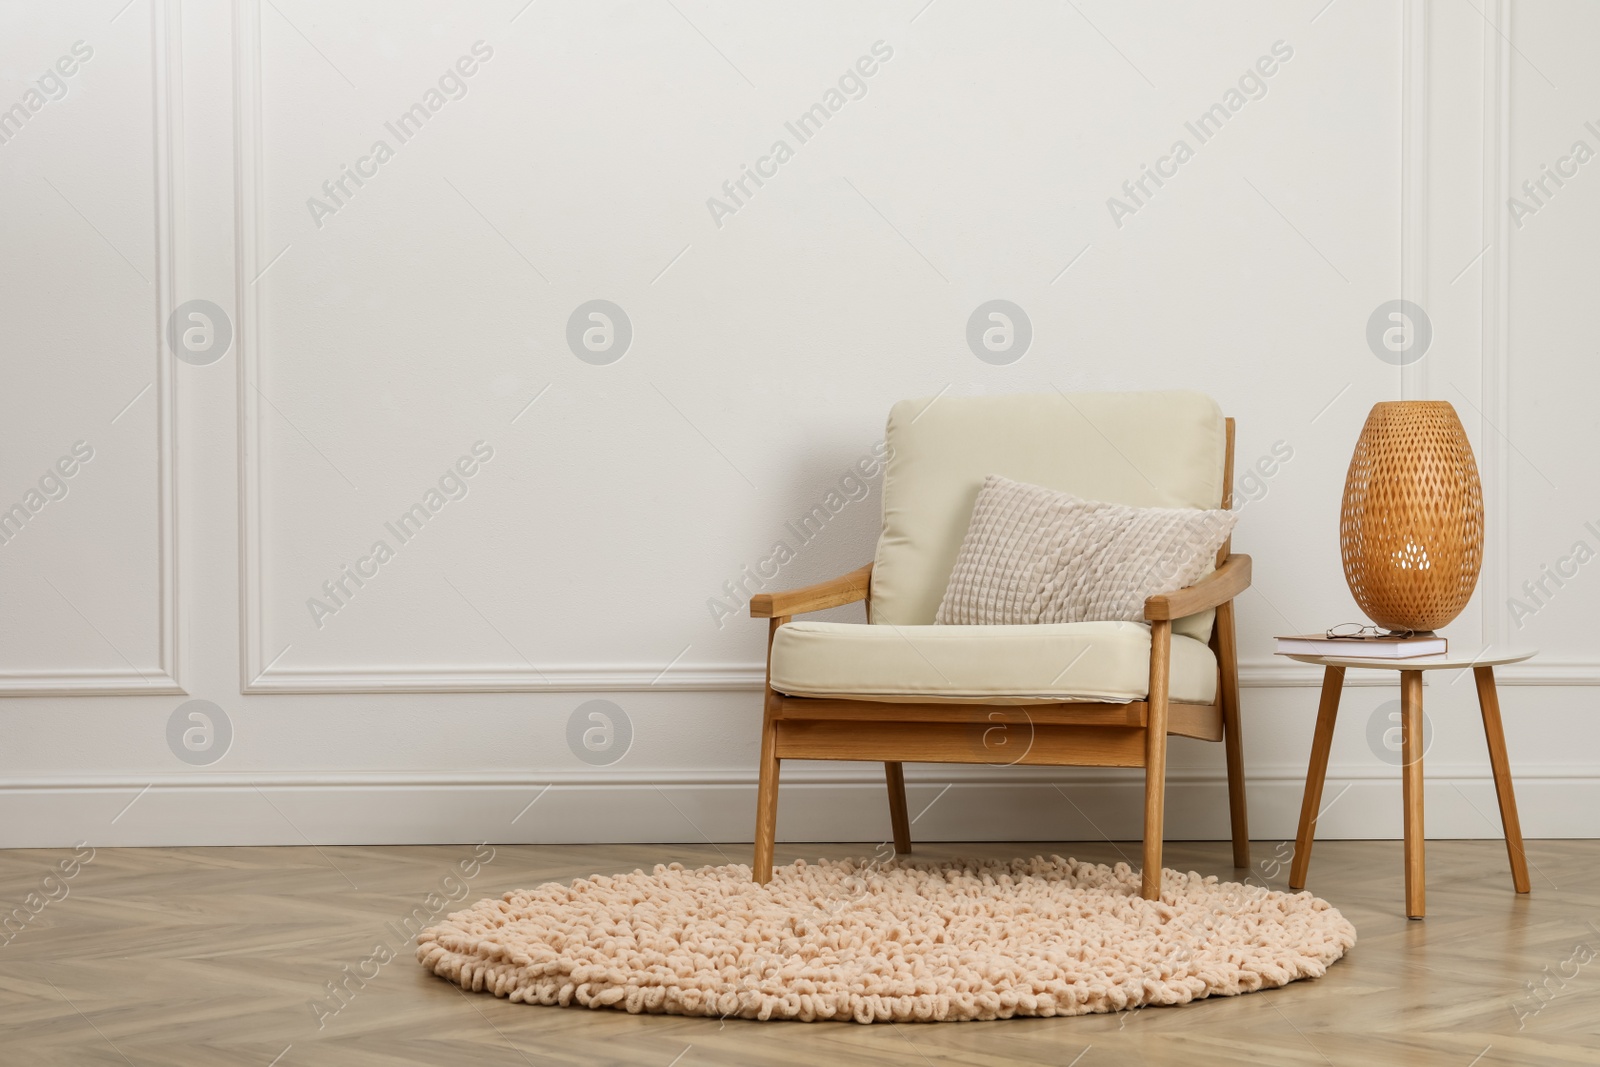 Photo of Stylish armchair with cushion and lamp near white wall indoors, space for text. Interior design